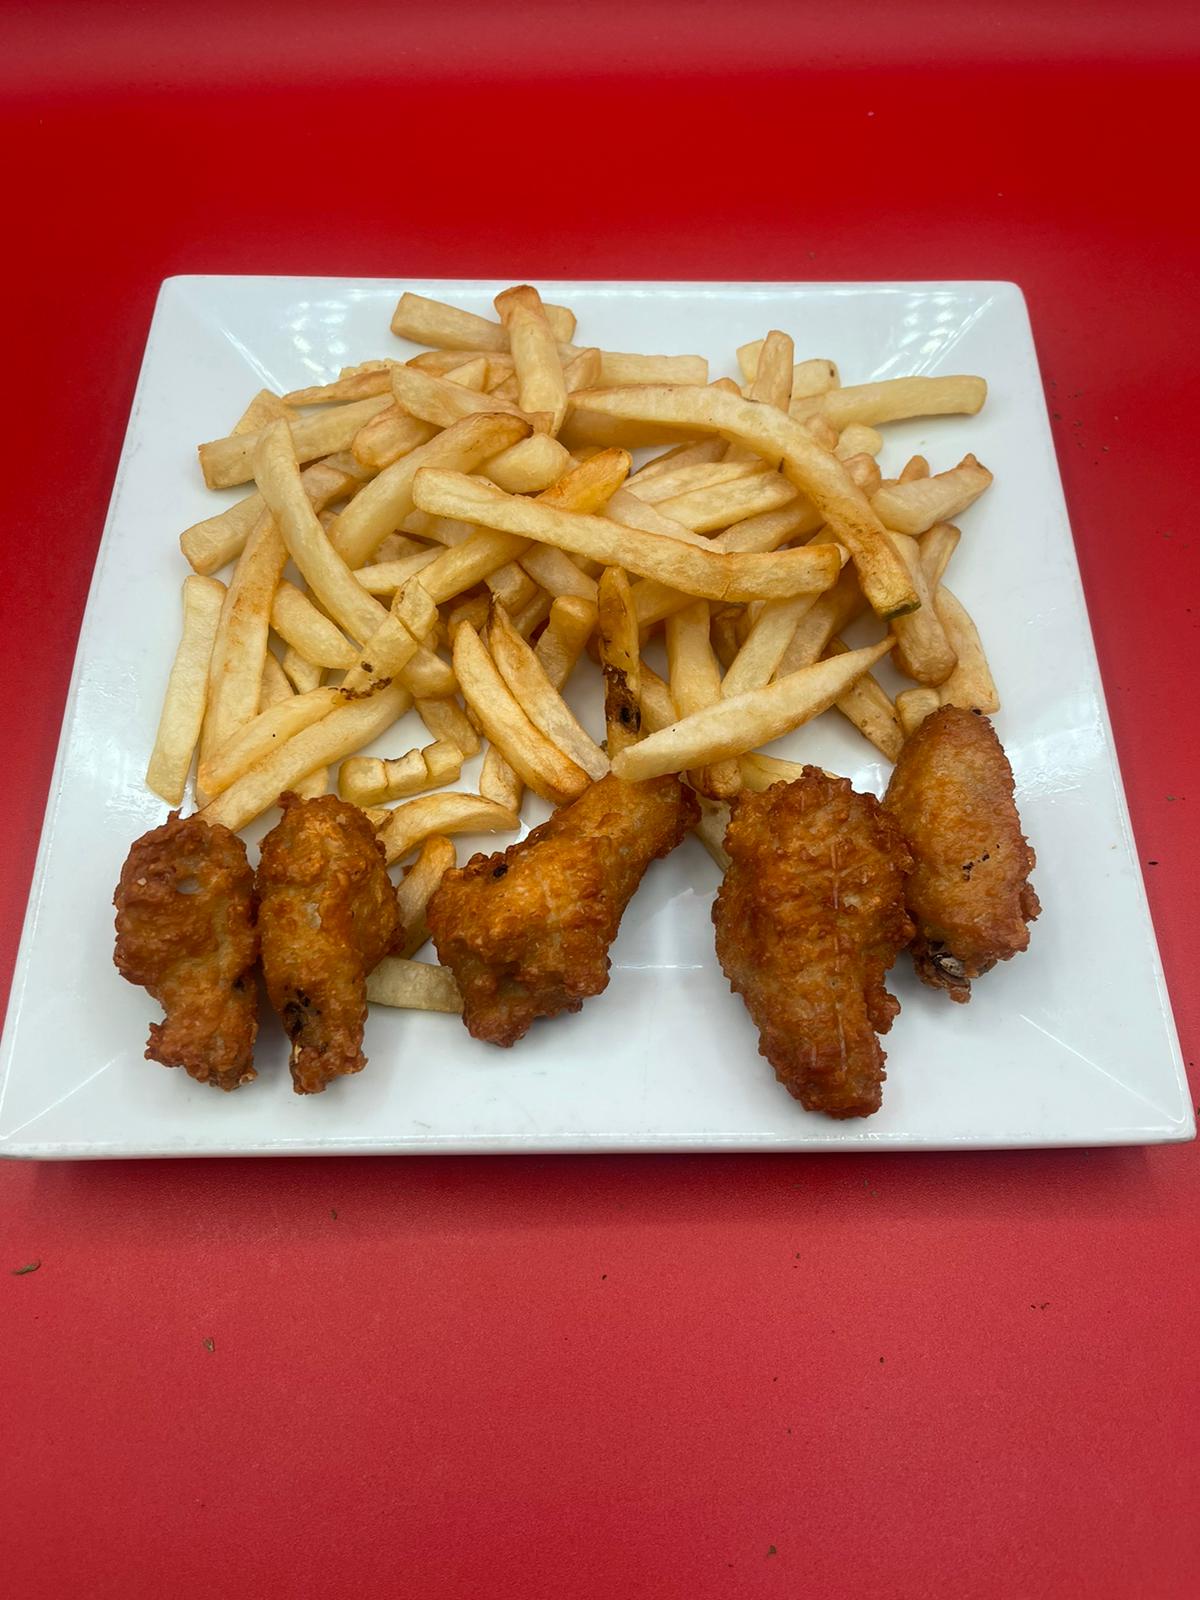 Chicken wings and french fries on a white plate.